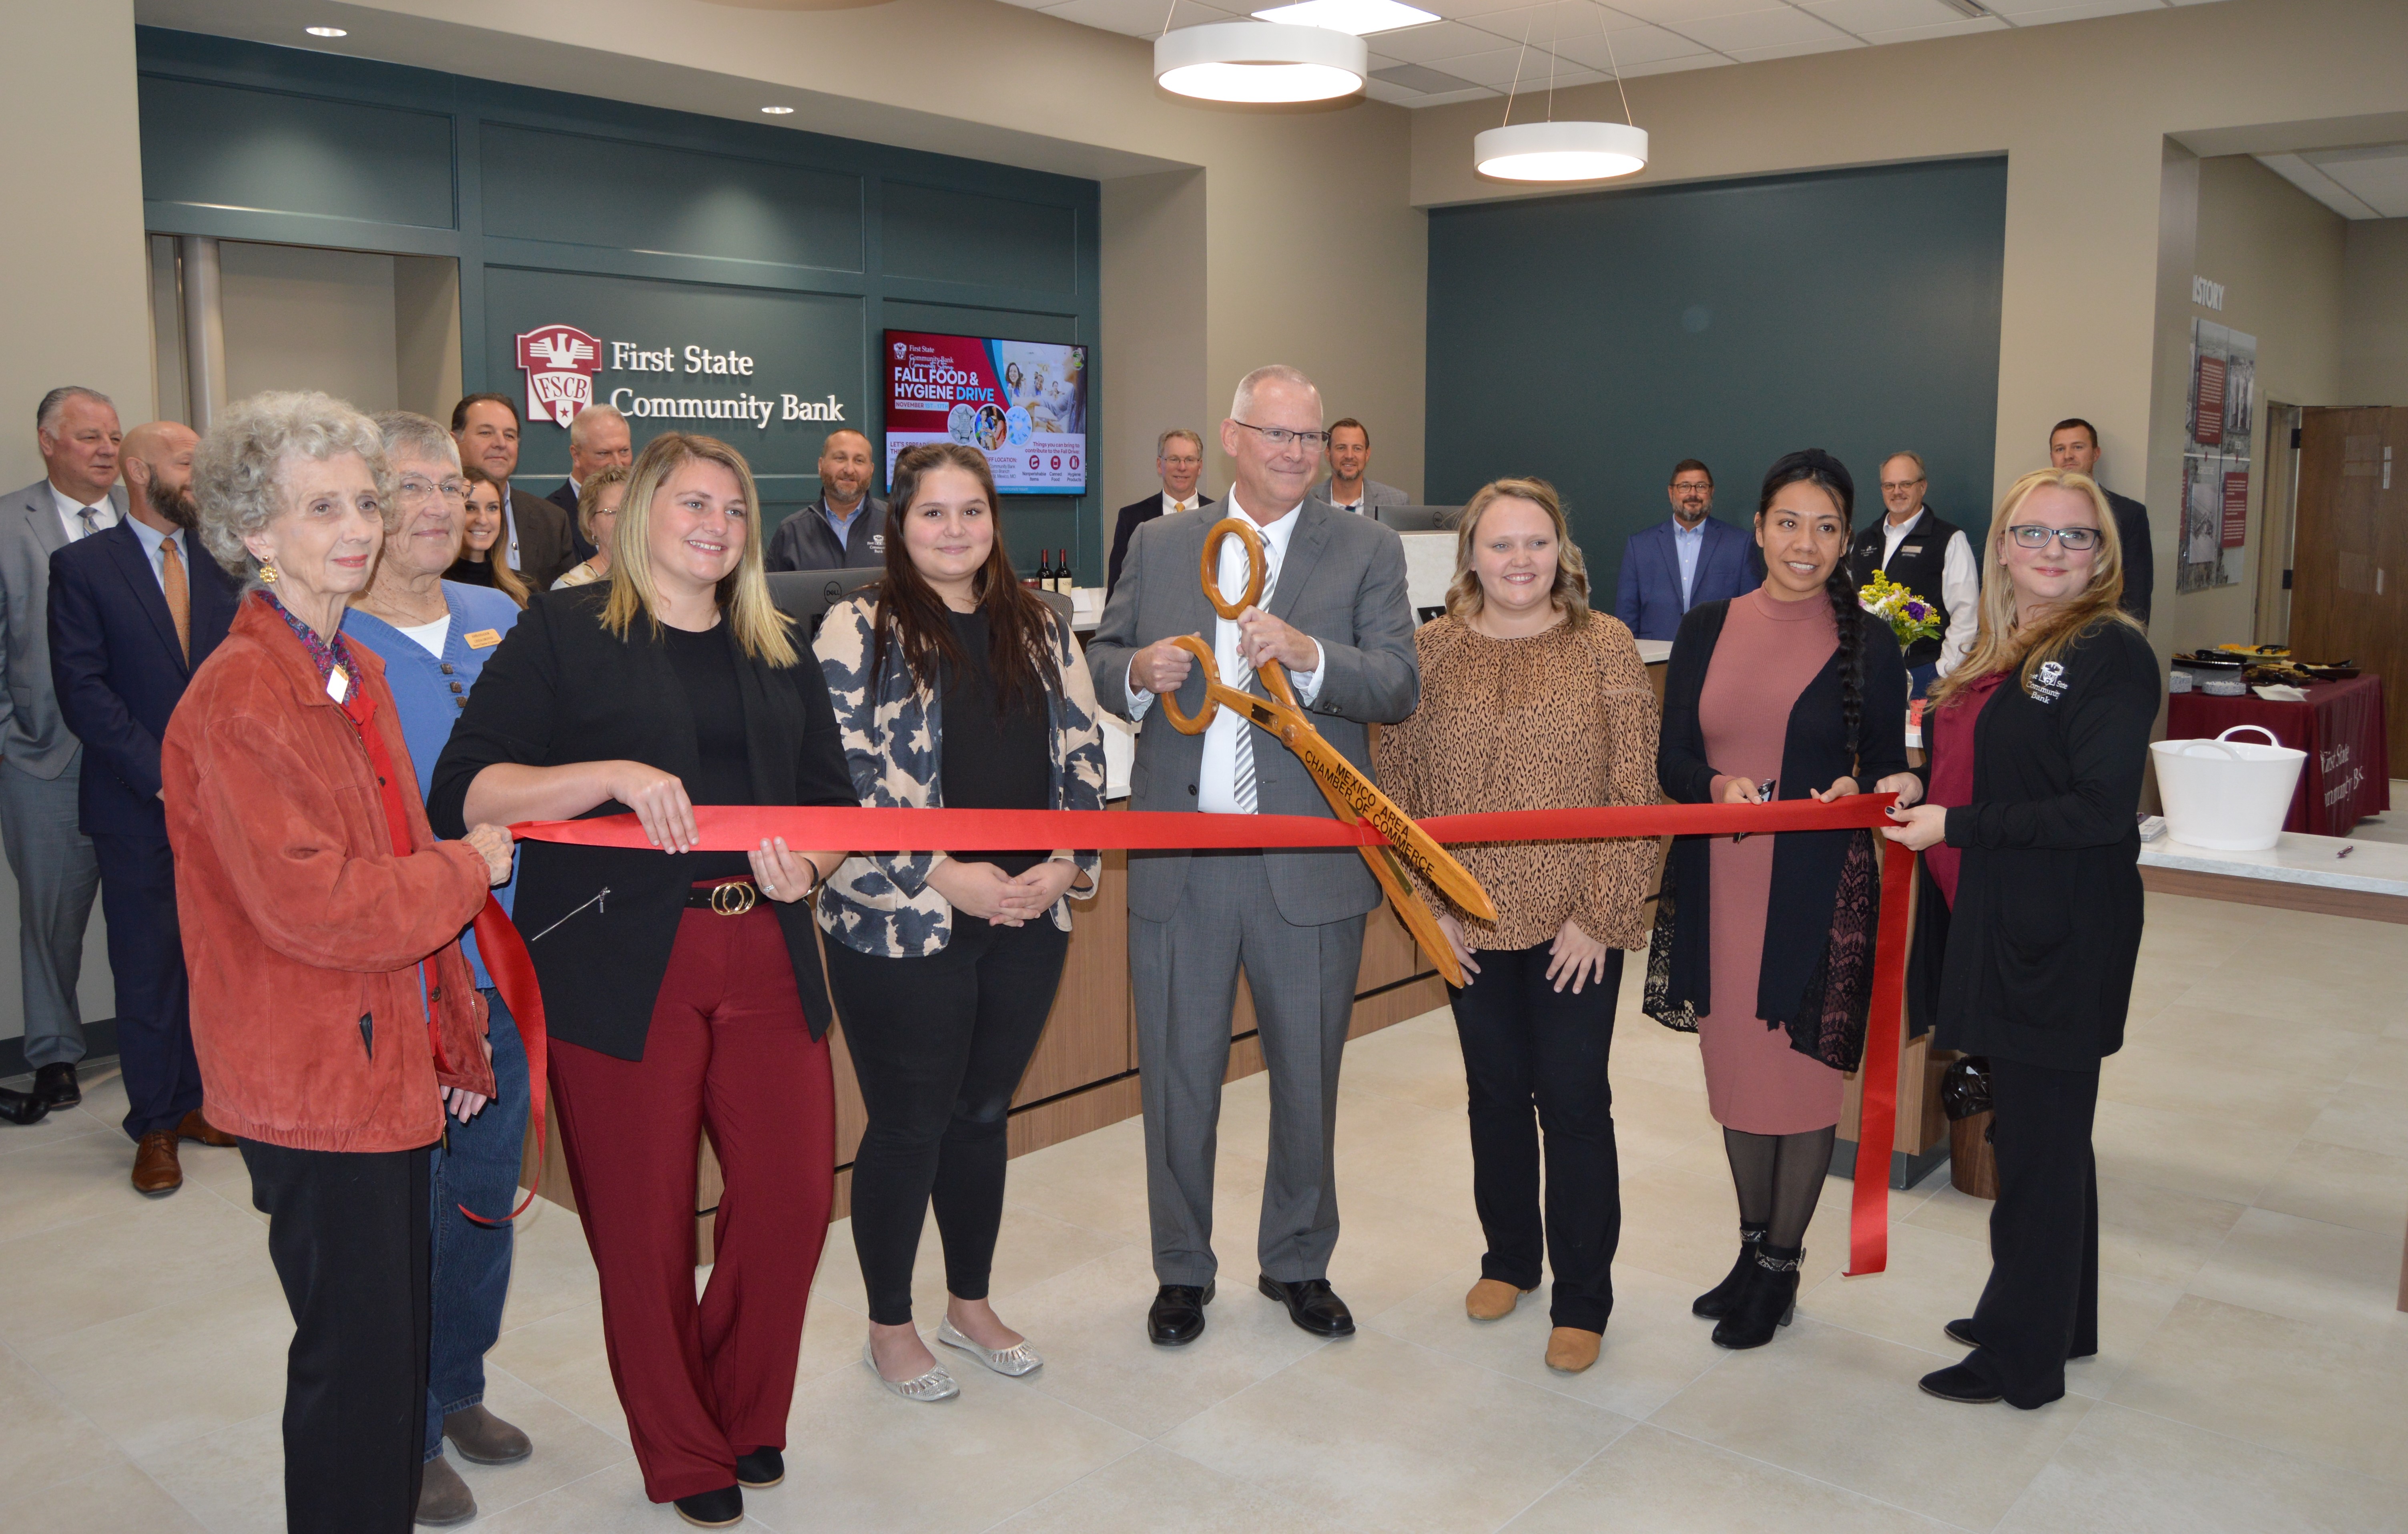 Mexico Area Chamber Of Commerce Ribbon Cutting For New First State Community Bank Facility